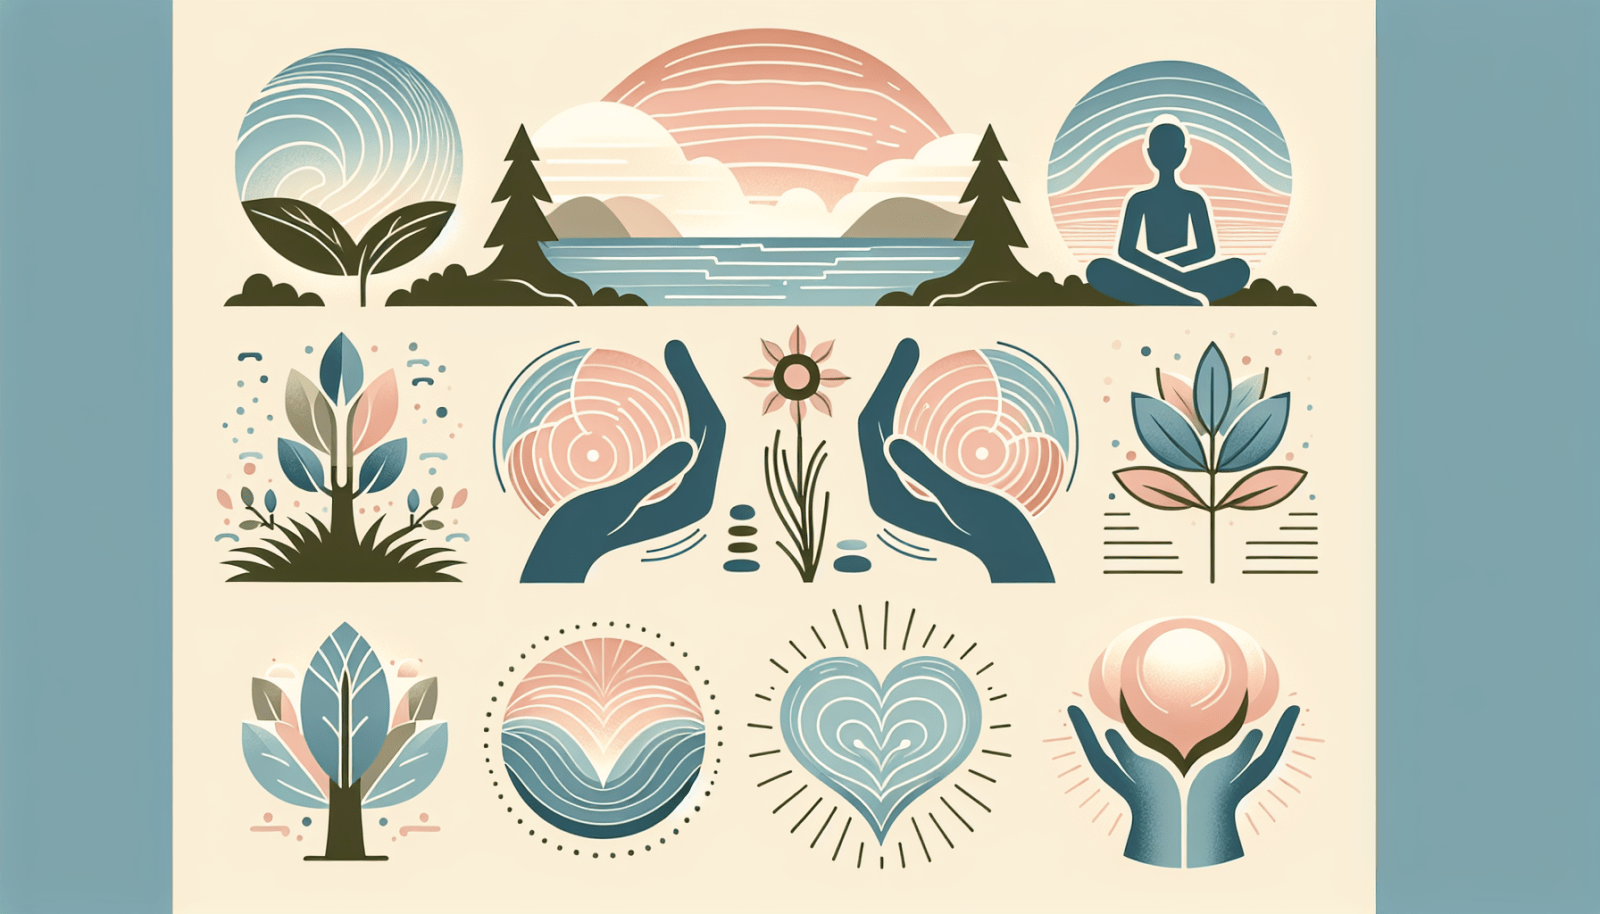 A stylized illustration with three rows depicting nature and wellness themes, including images of a plant with swirl patterns, a sunset over a calm sea flanked by trees with a seated person, hands nurturing a flower, geometric leaves, a wavy sun, a heart, and hands cradling a glowing orb, all in soft pastel colors.